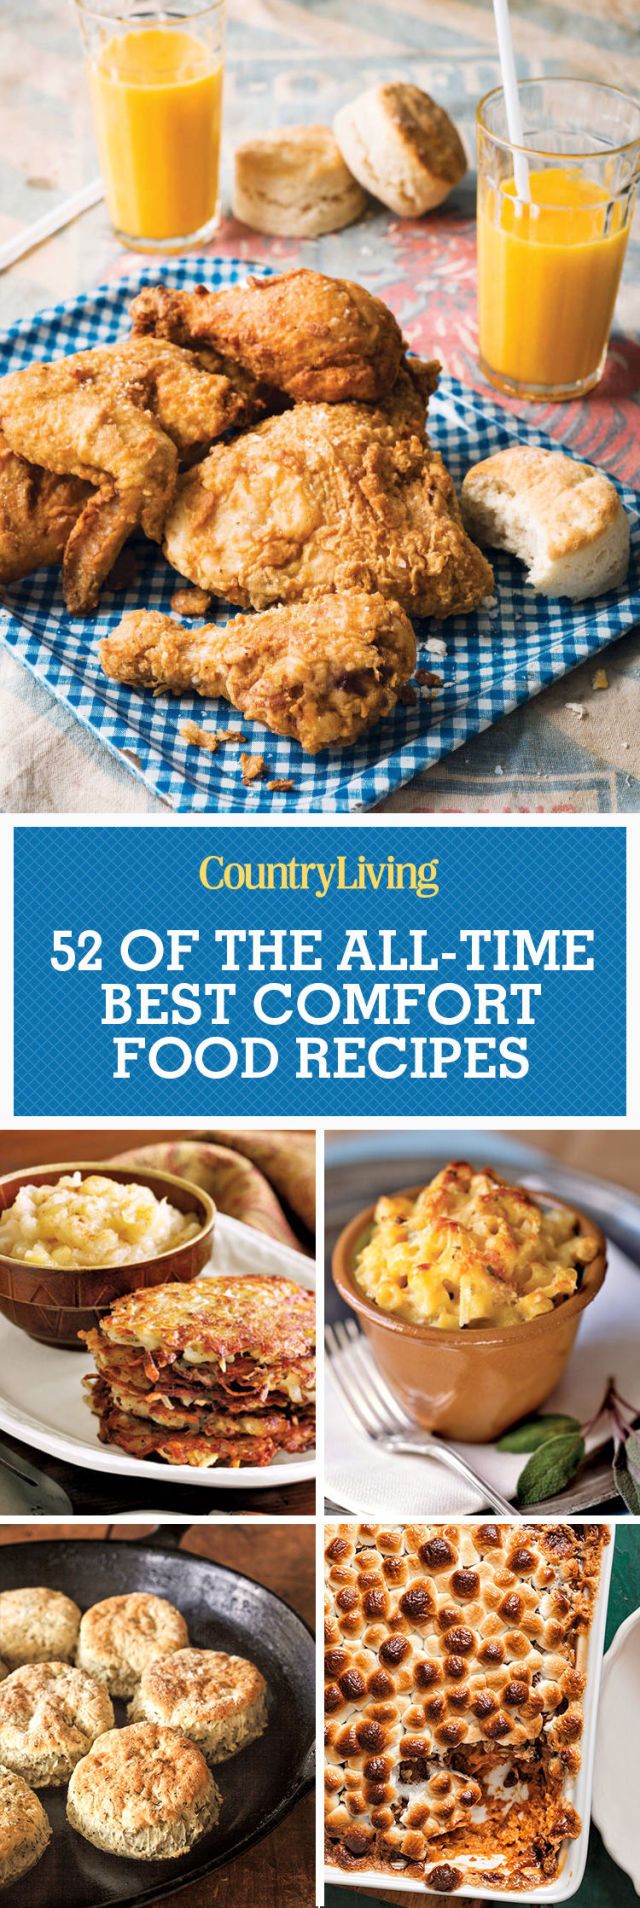 55 Easy Comfort Food Recipes Best Southern Comfort Food Ideas